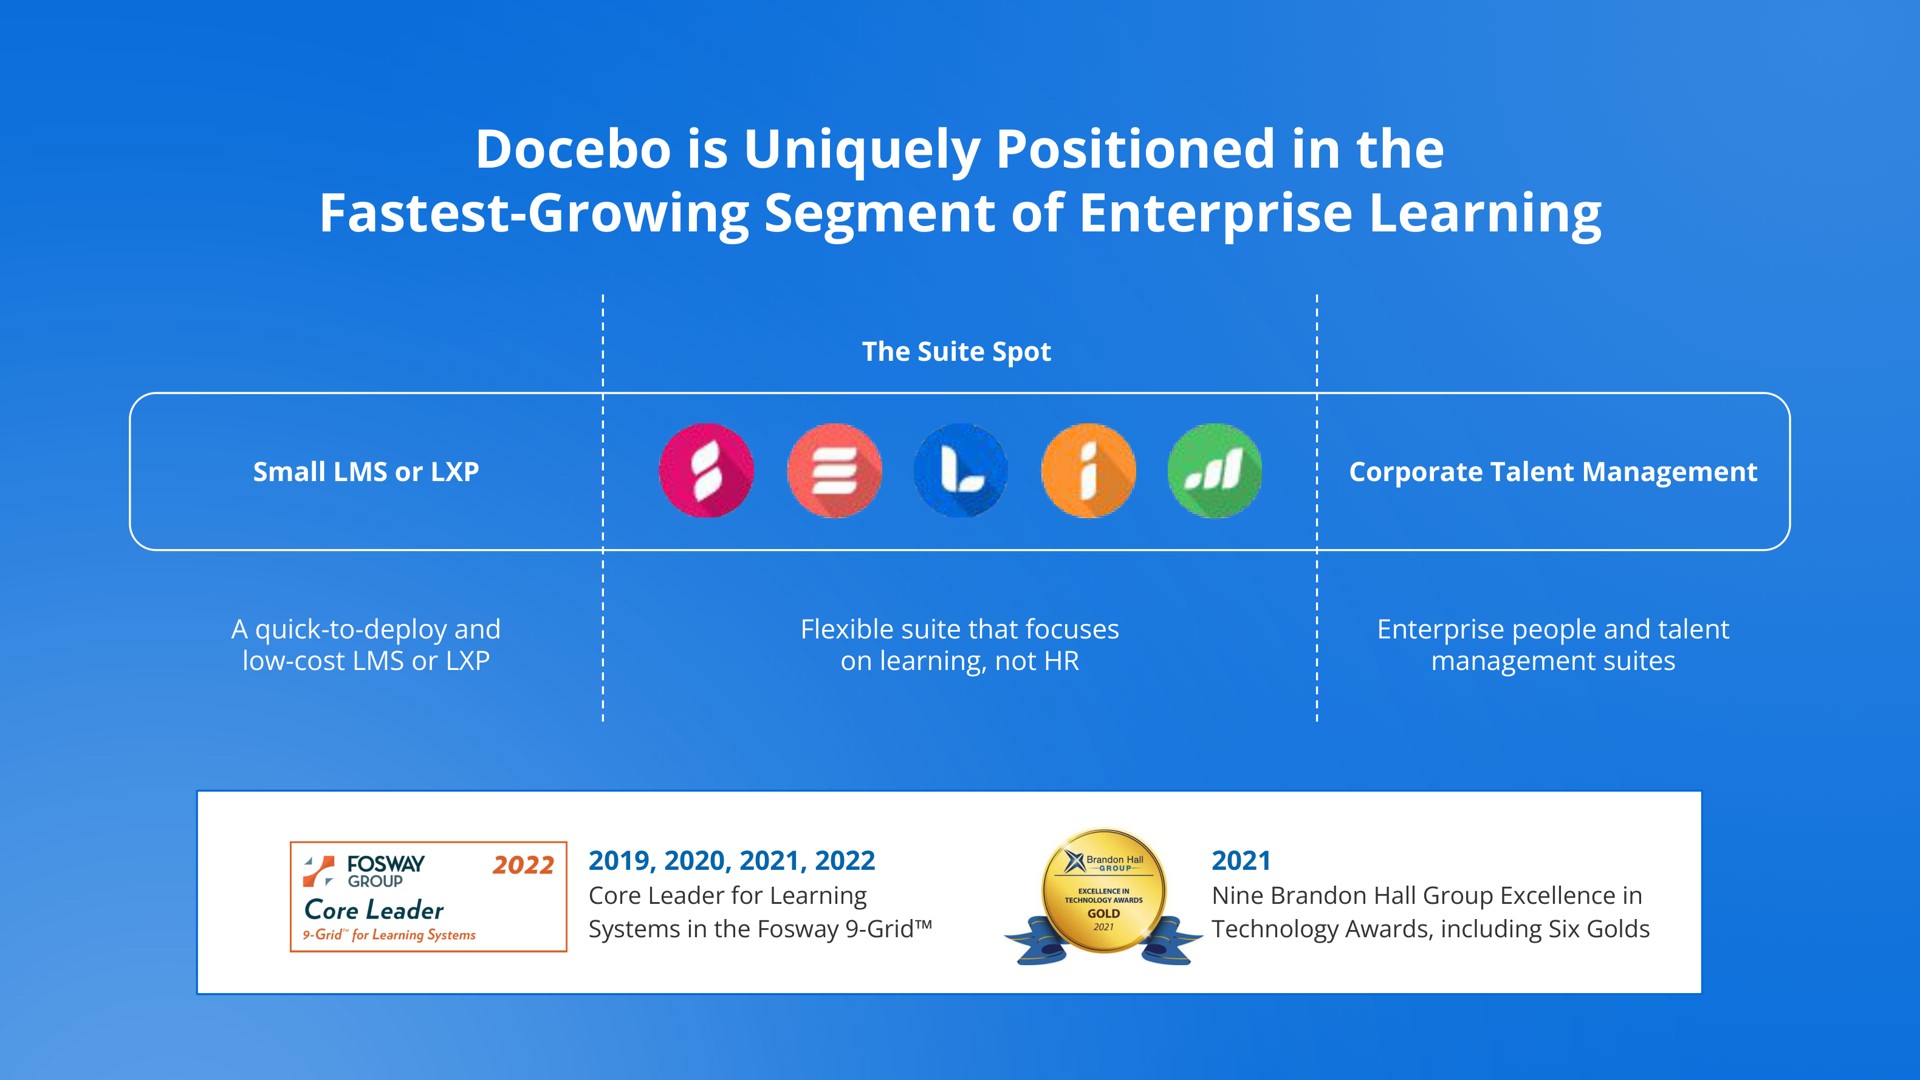 is uniquely positioned in the growing segment of enterprise learning | Docebo